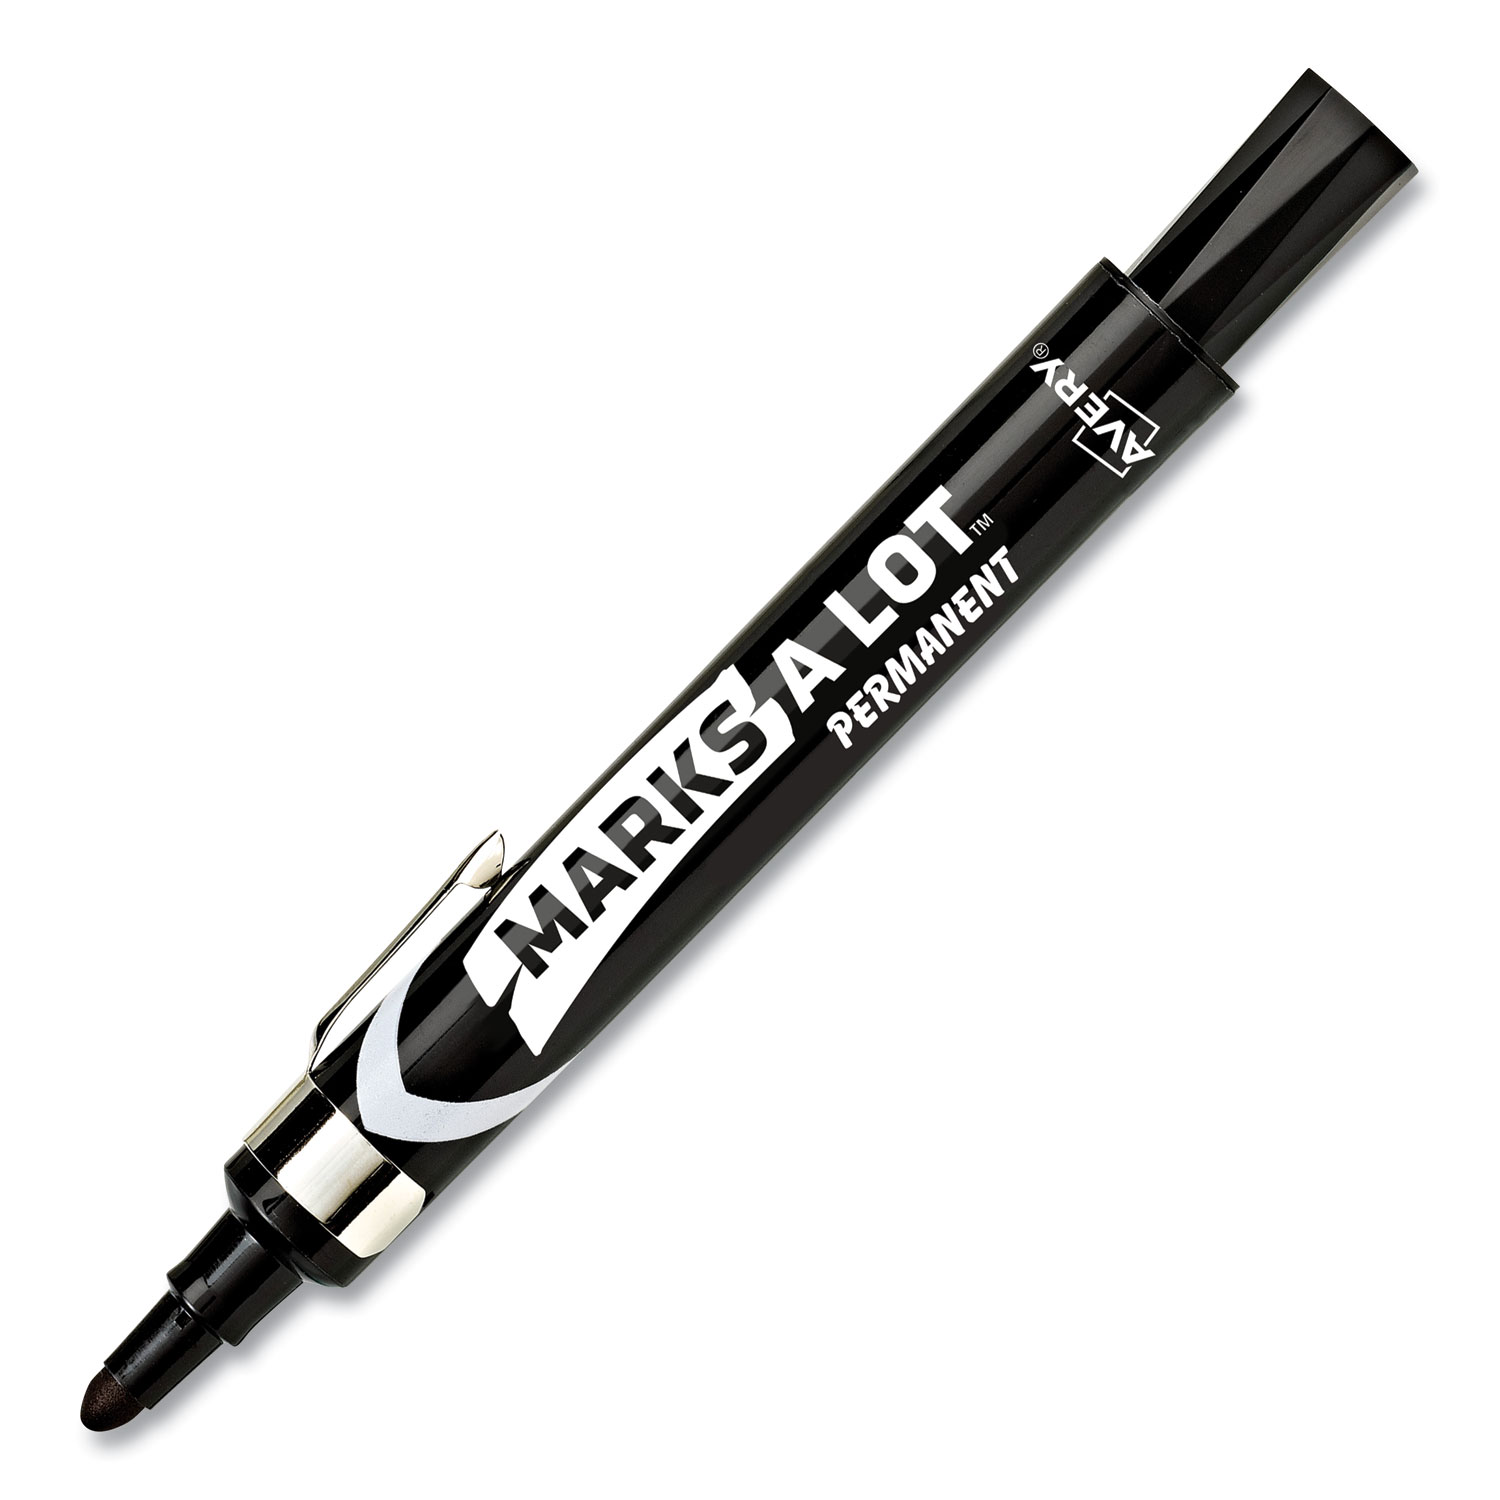  Avery 24878 MARKS A LOT Large Desk-Style Permanent Marker with Metal Pocket Clip, Broad Bullet Tip, Black (AVE500884) 